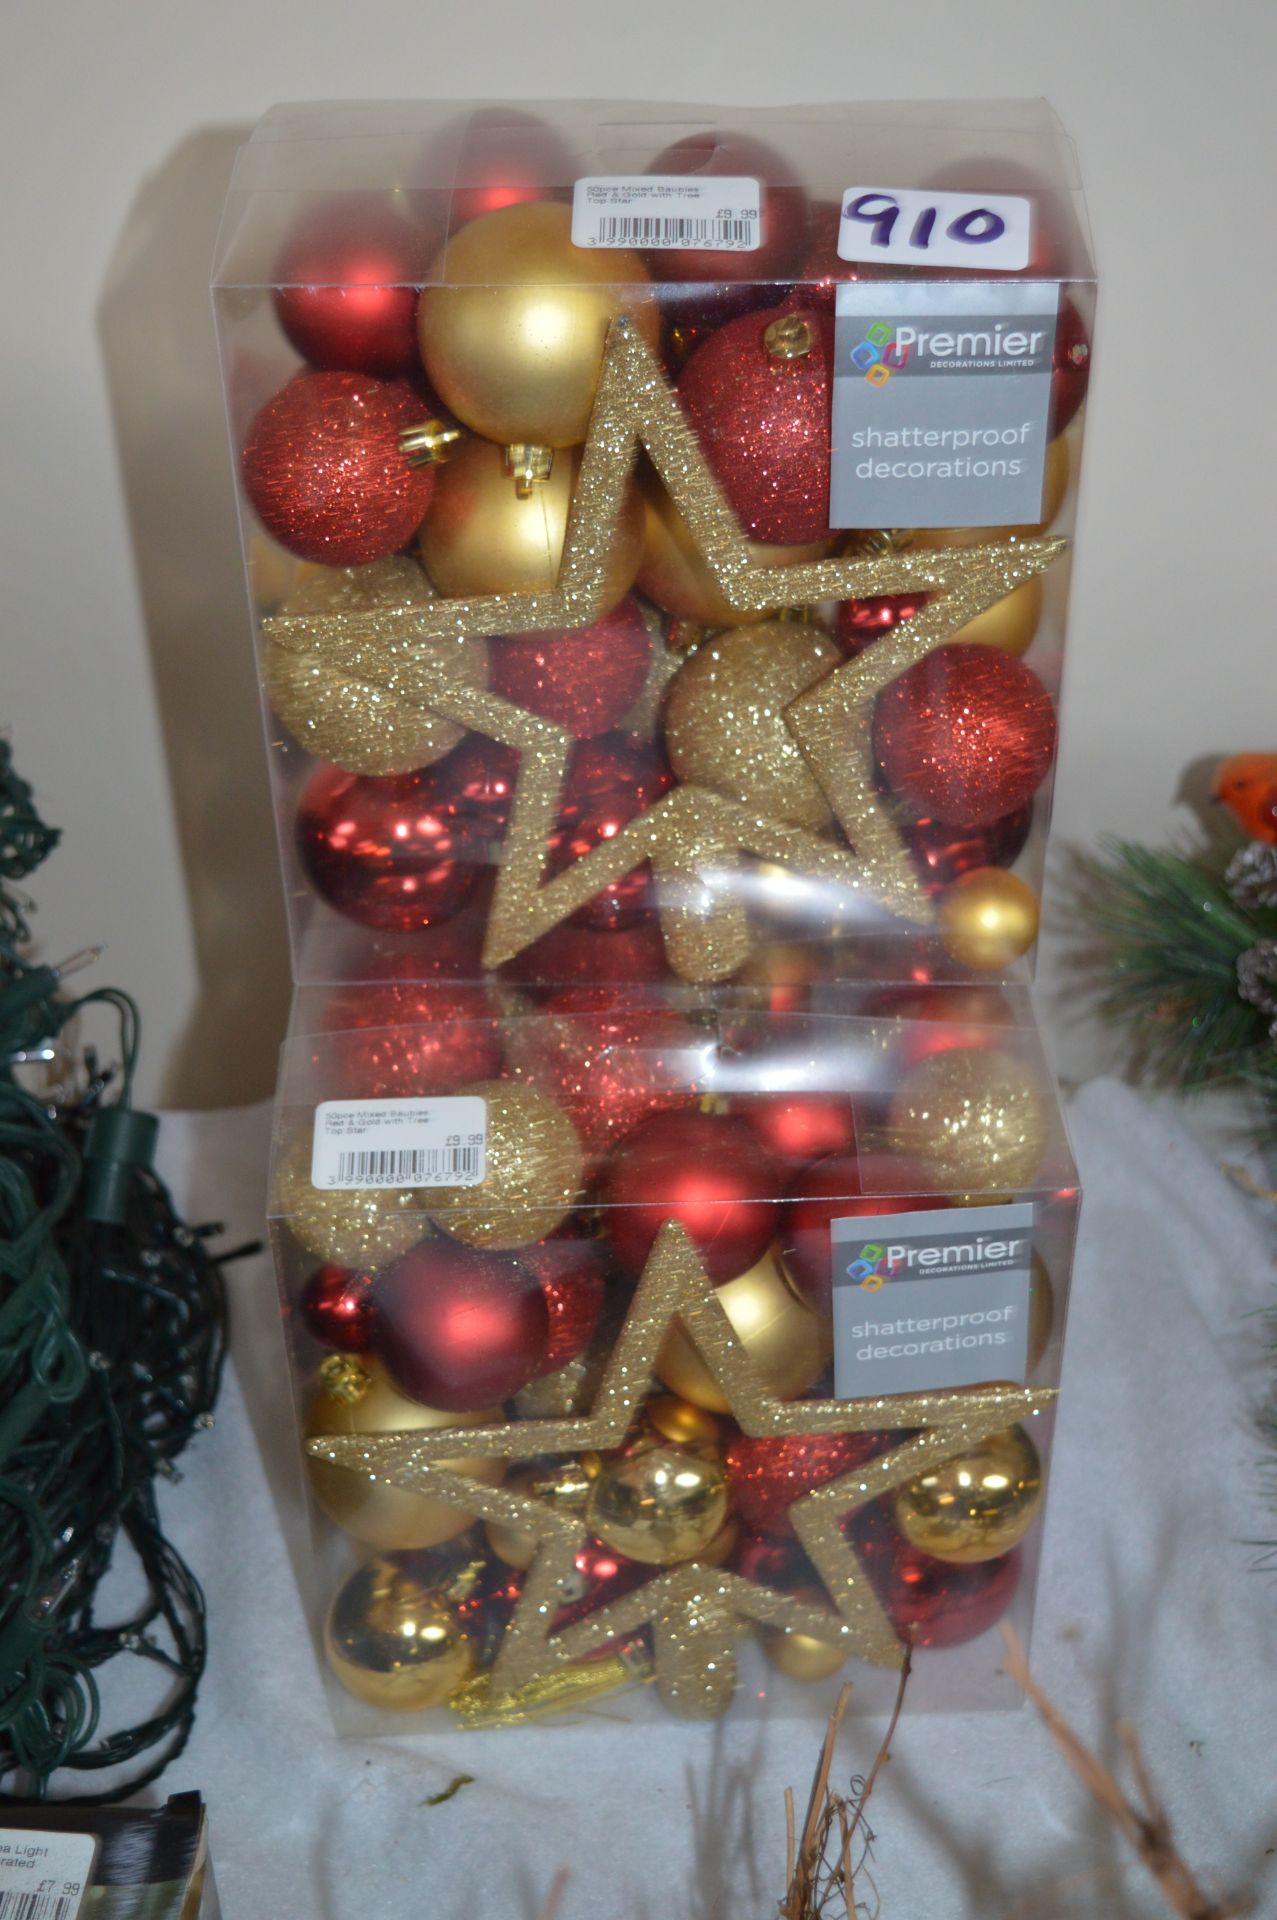 *Three Packs Containing Assorted Shatterproof Christmas Decorations